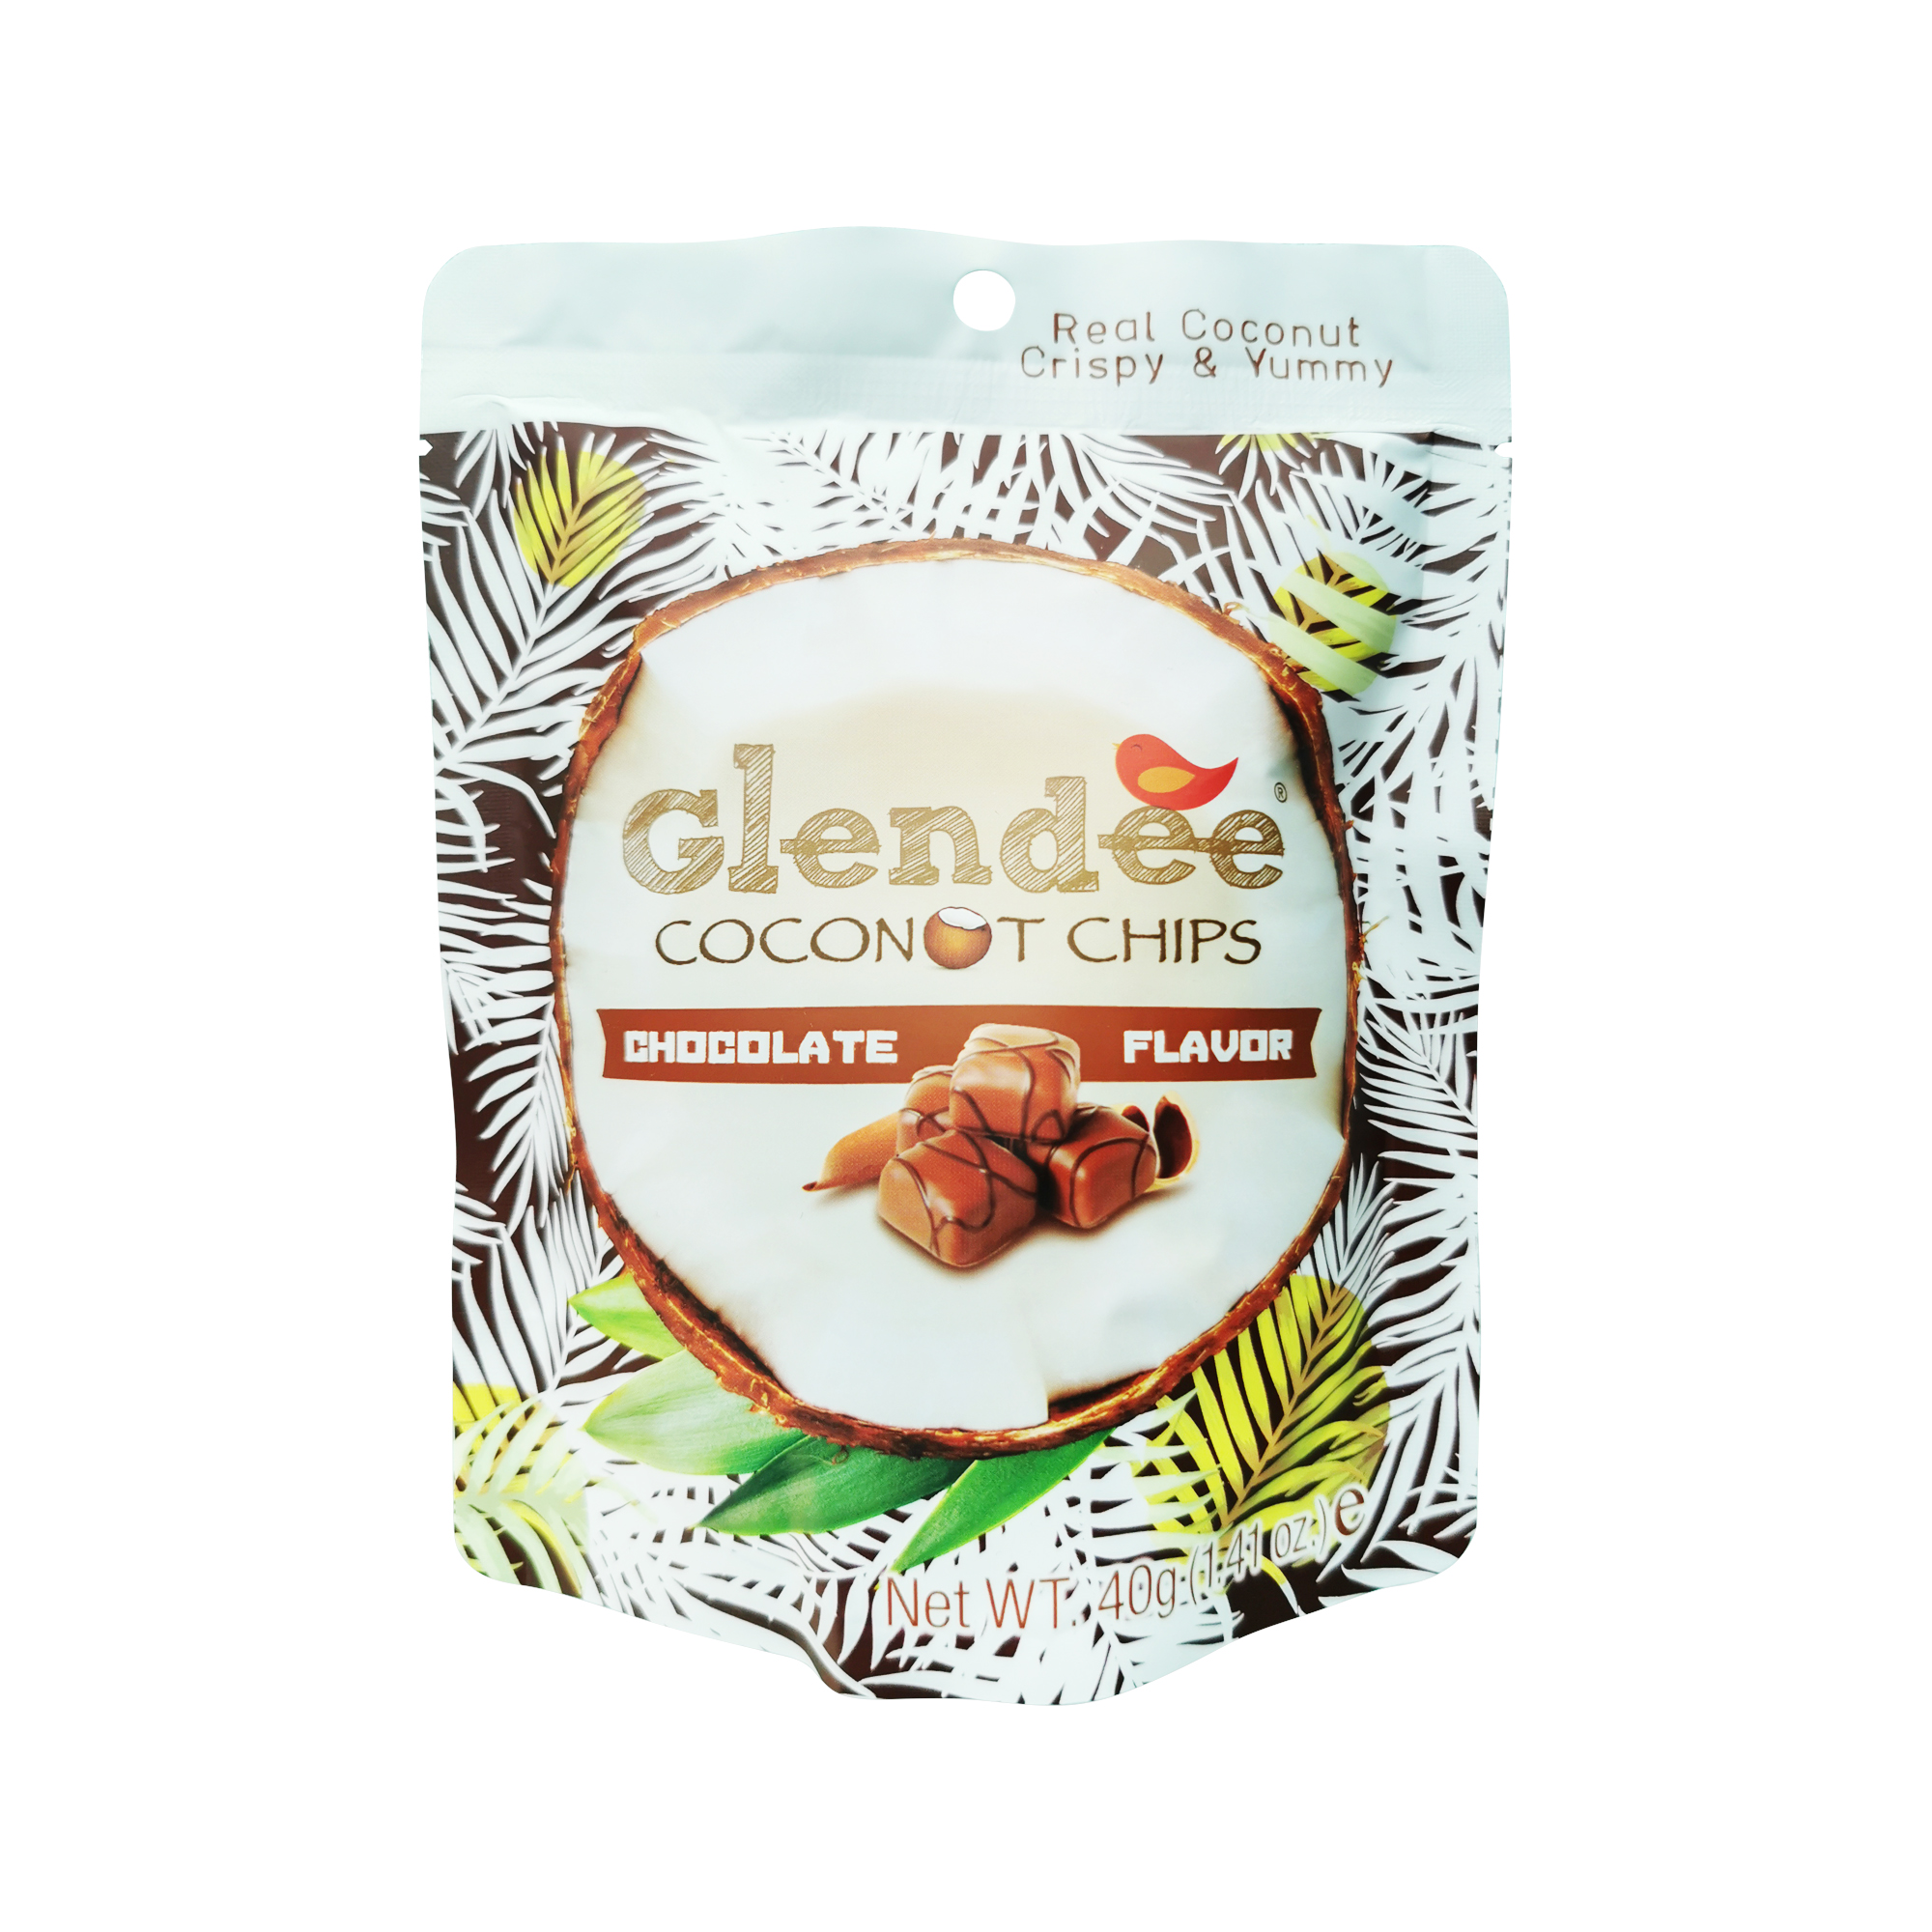 Glendee Coconut Chips Chocolate 40g